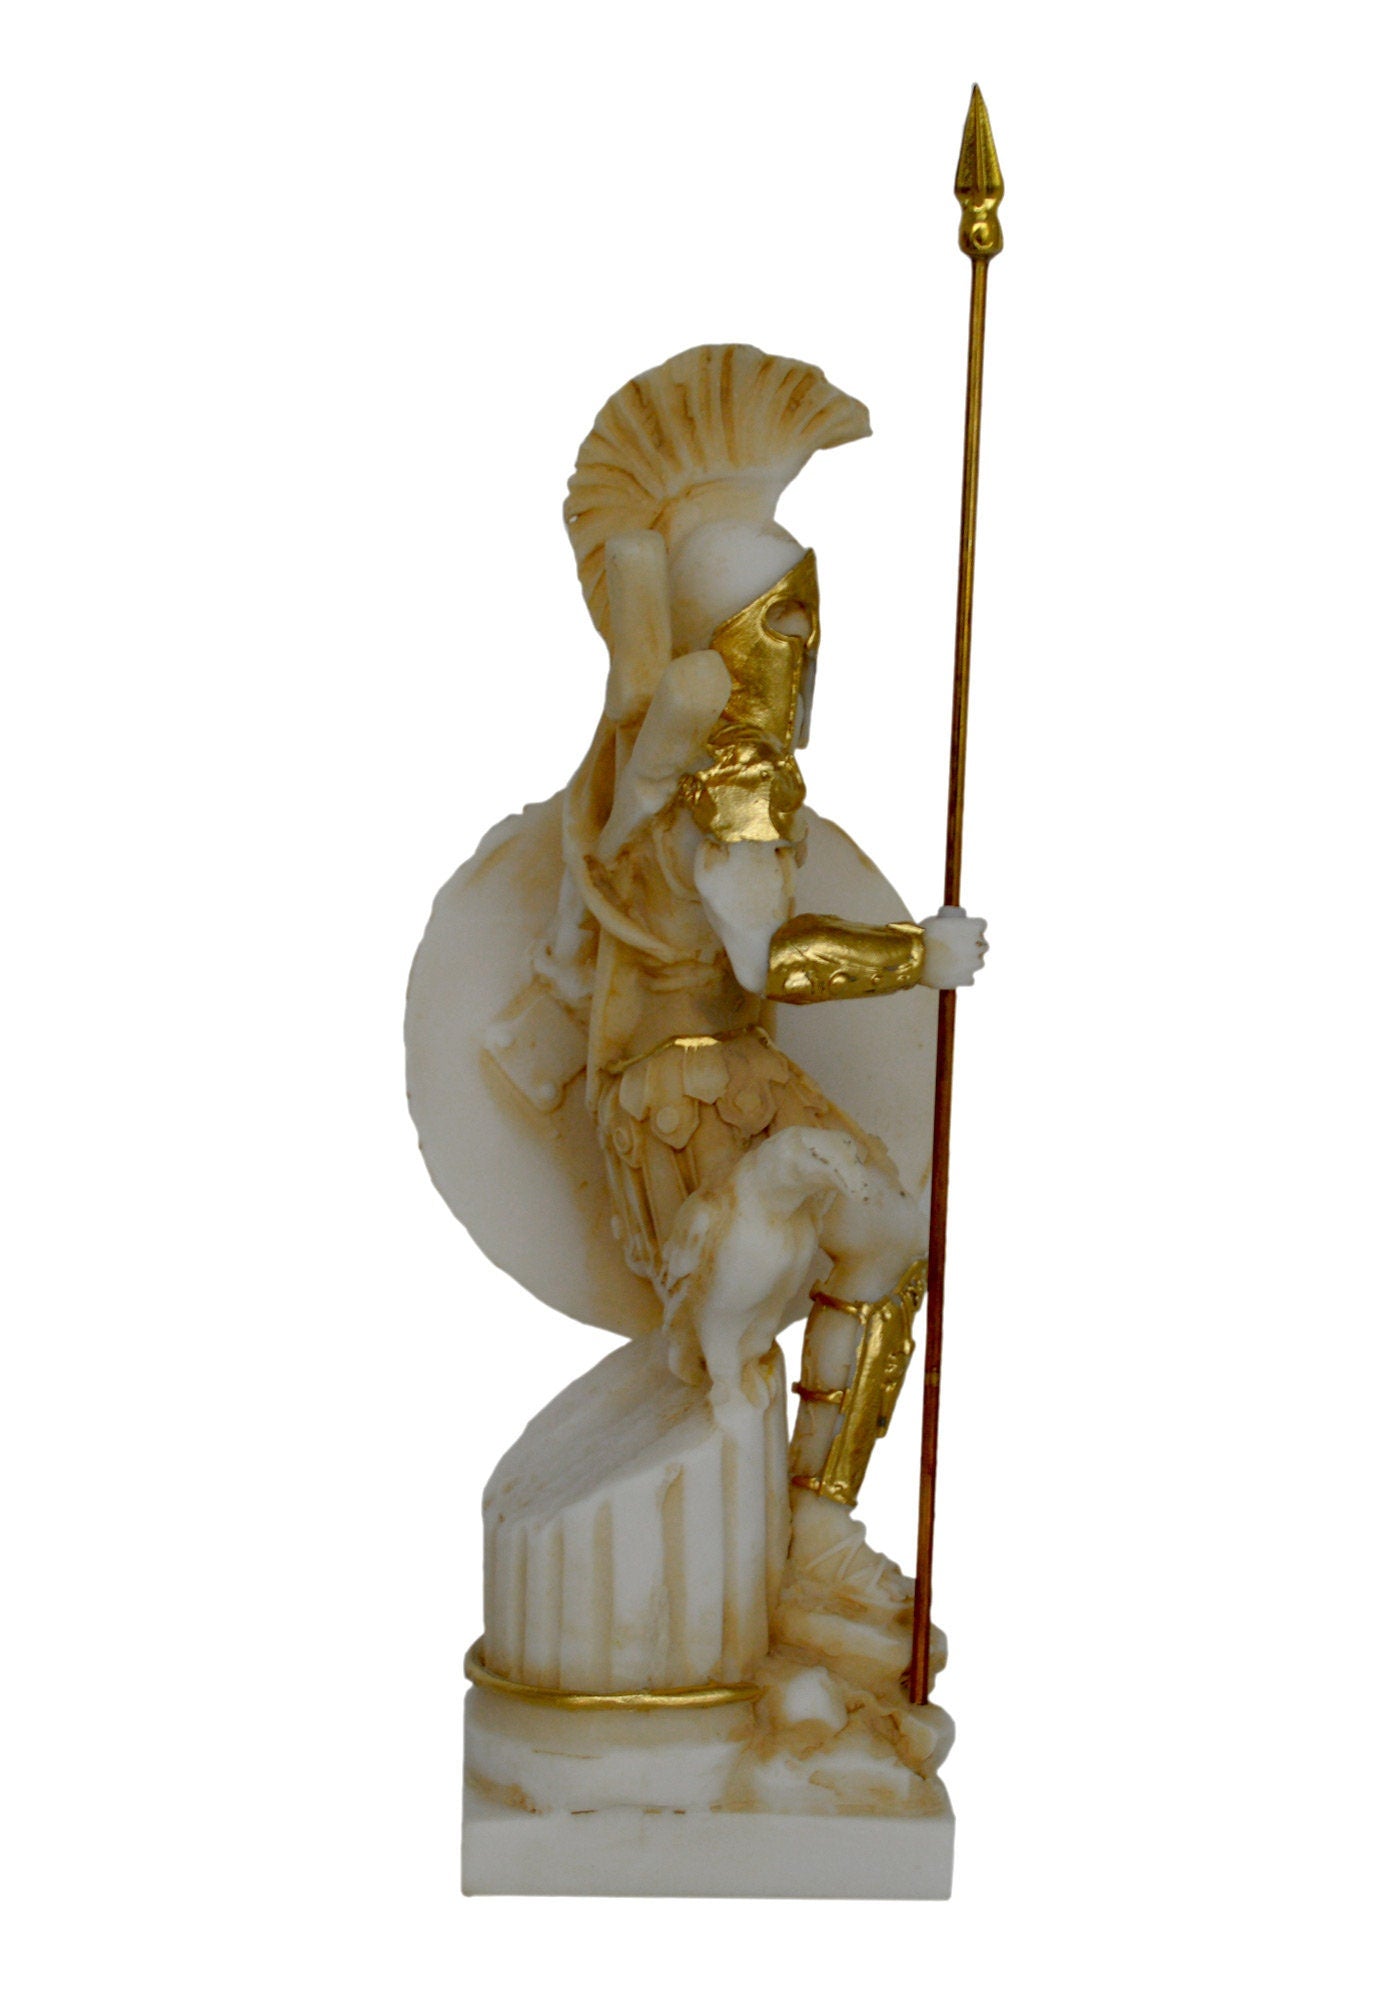 Ares Mars - Greek Roman God of War and Courage - Spirit of Battle - Son of Zeus and Hera - Olympian God - Aged Alabaster Statue